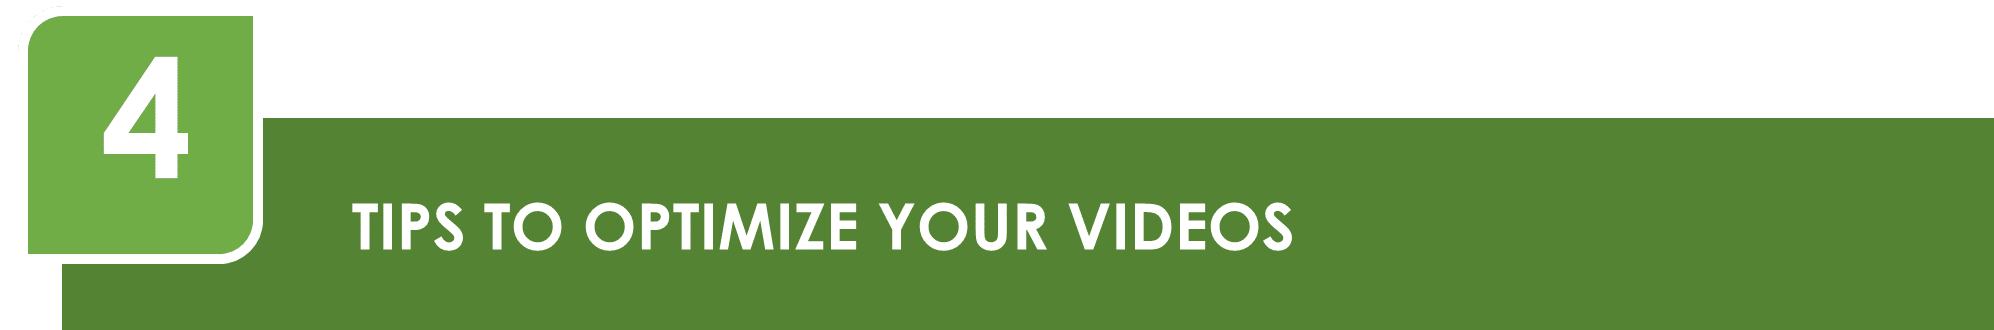 Tips to Optimize Your Videos